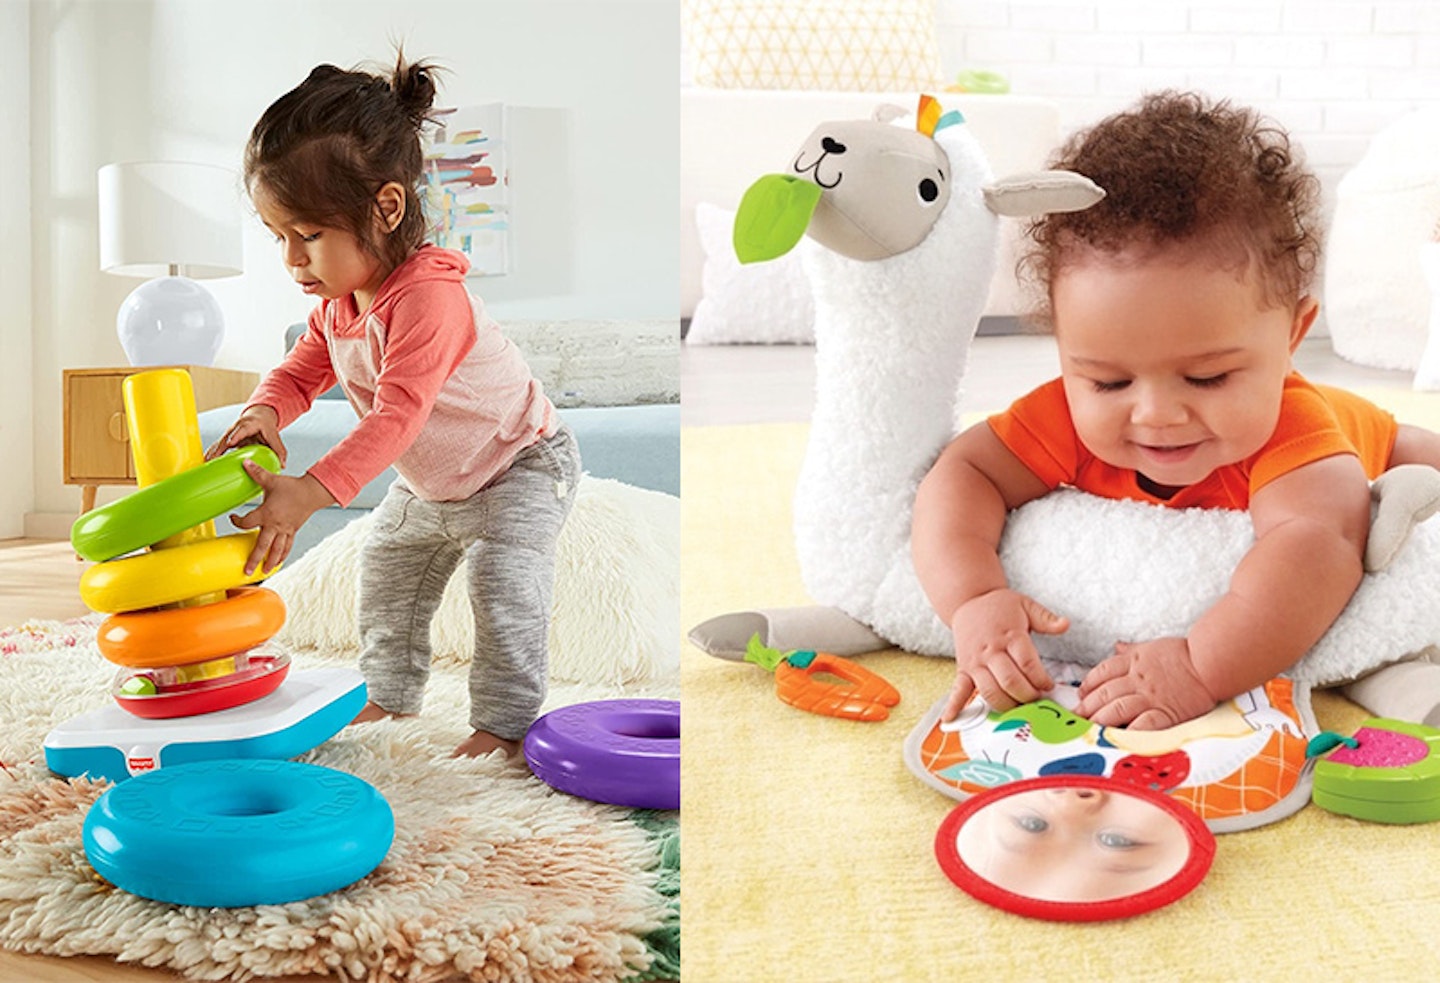 Fisher-Price unveils first-ever sensory line of toys for preschoolers